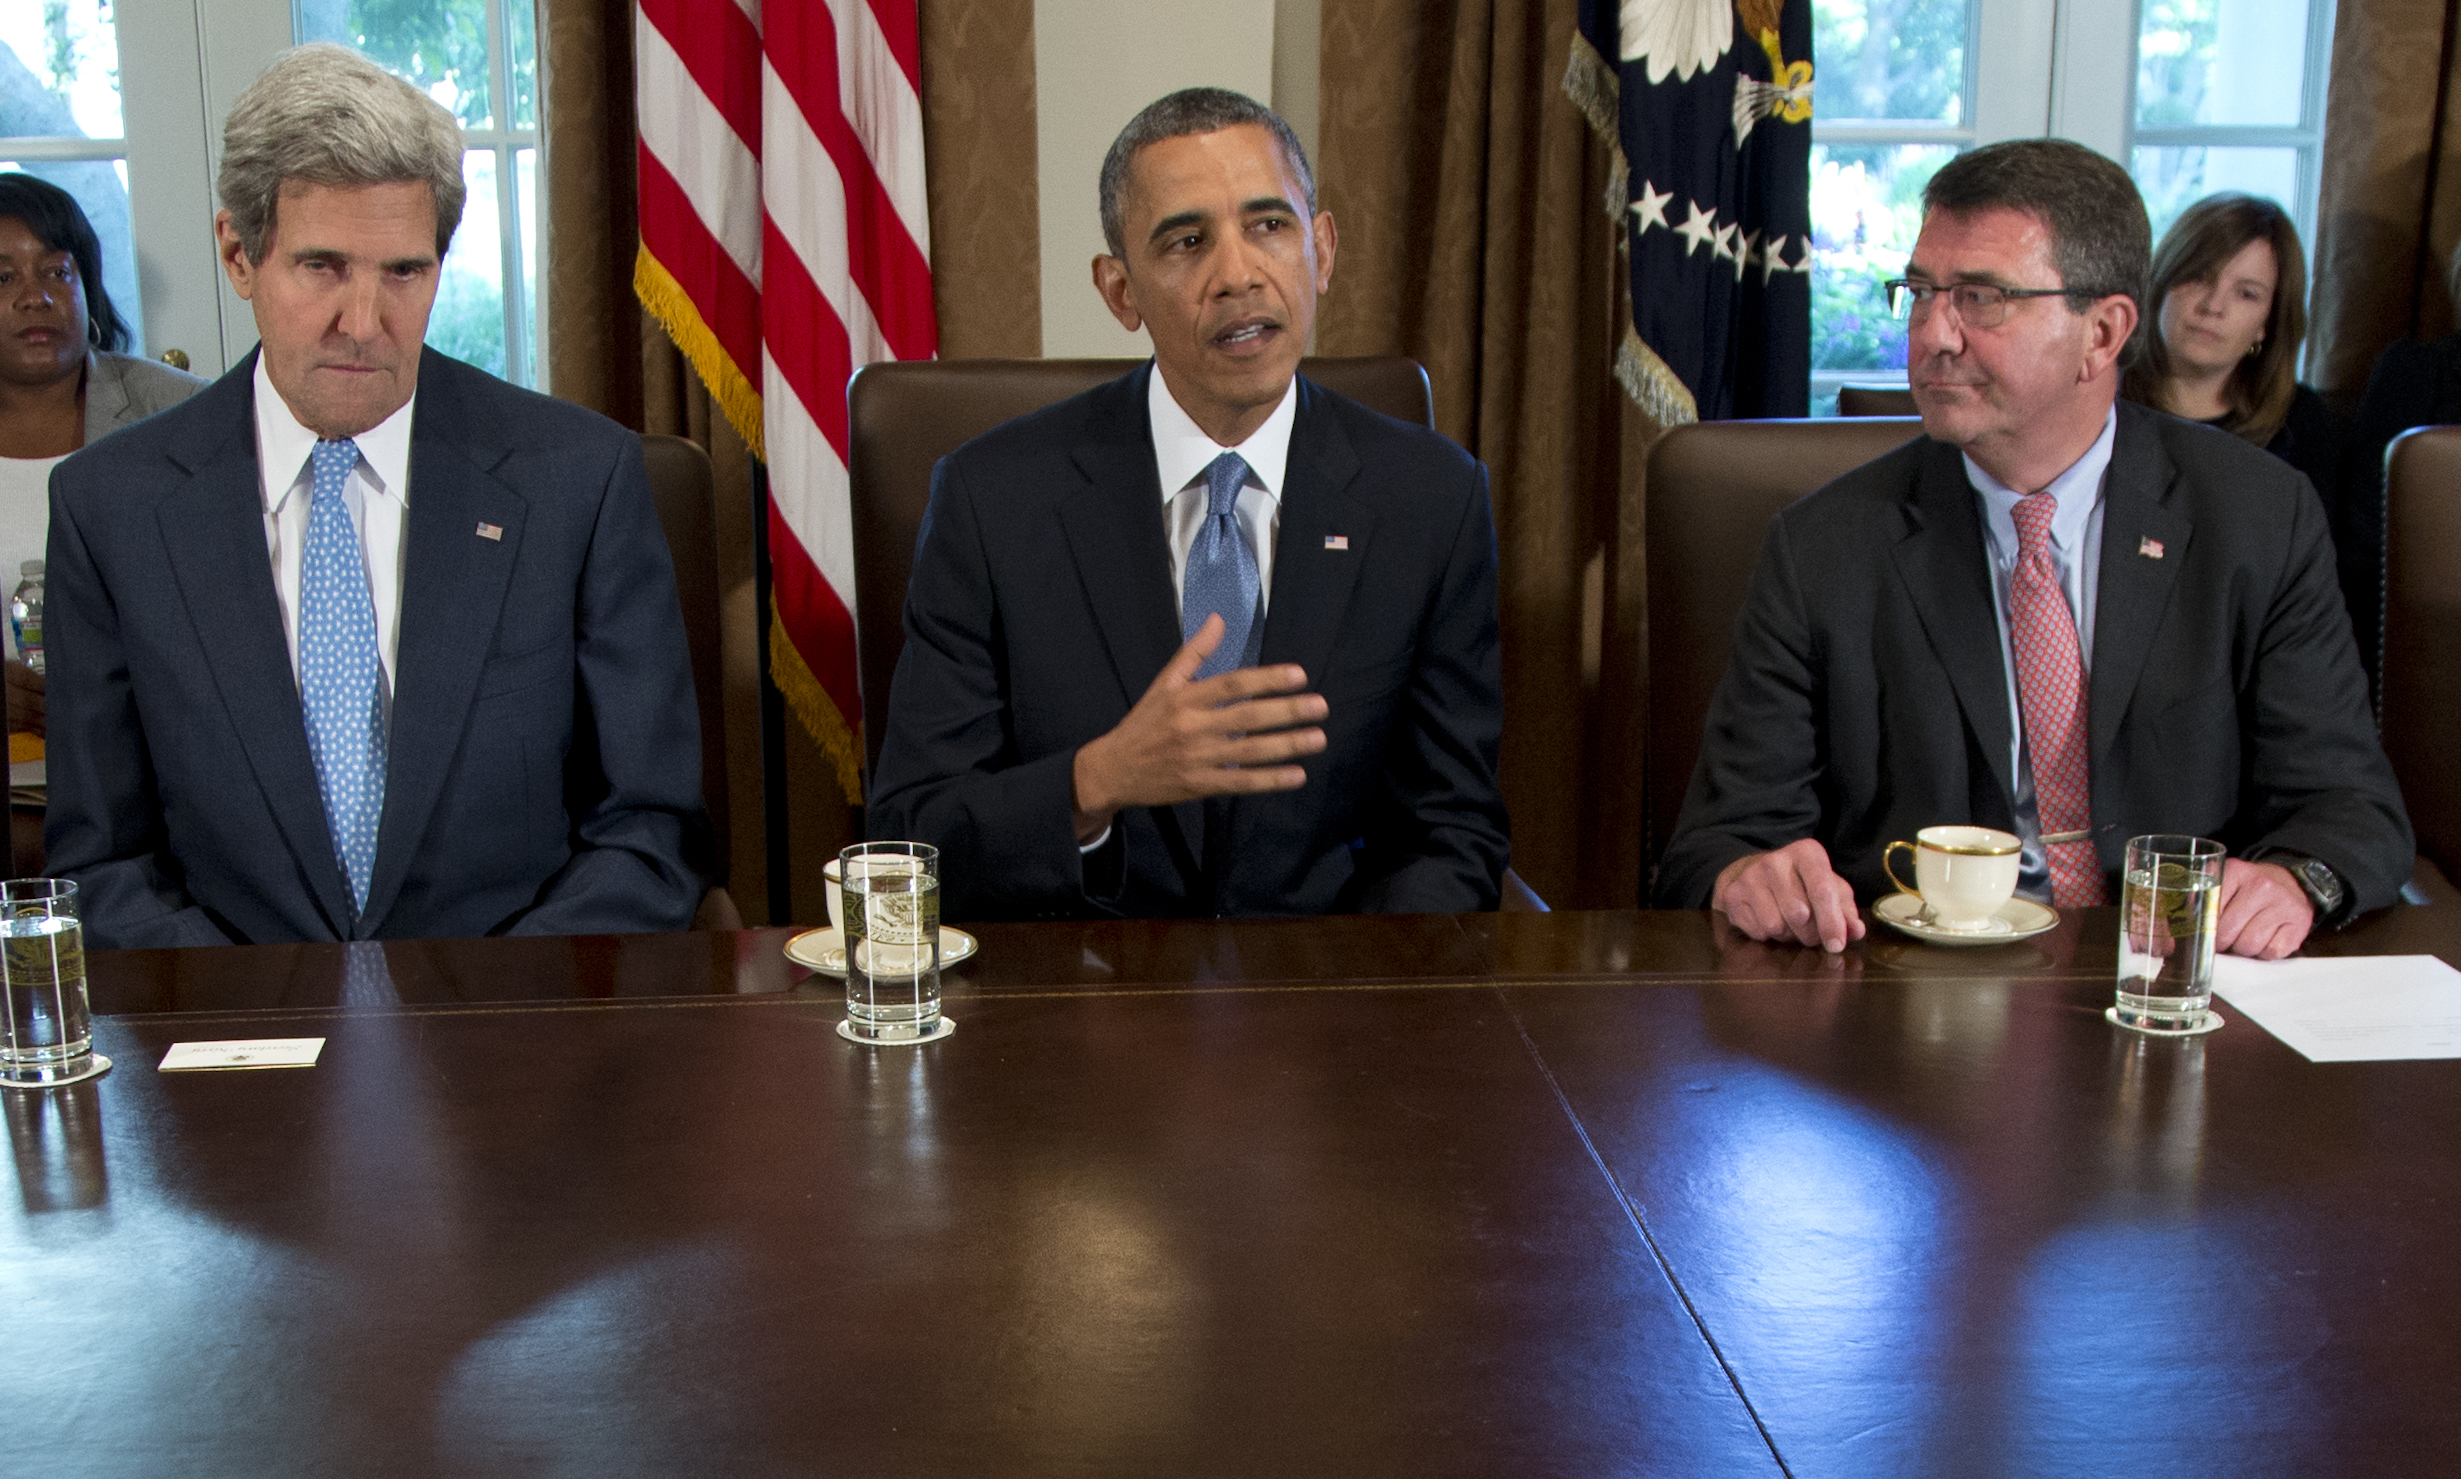 FILE - In this Sept. 30, 2013 file photo, then-Deputy Defense Secretary Ashton Carter, right, listens a President Barack Obama speaks to members of the media in the Cabinet Room of the White House. 